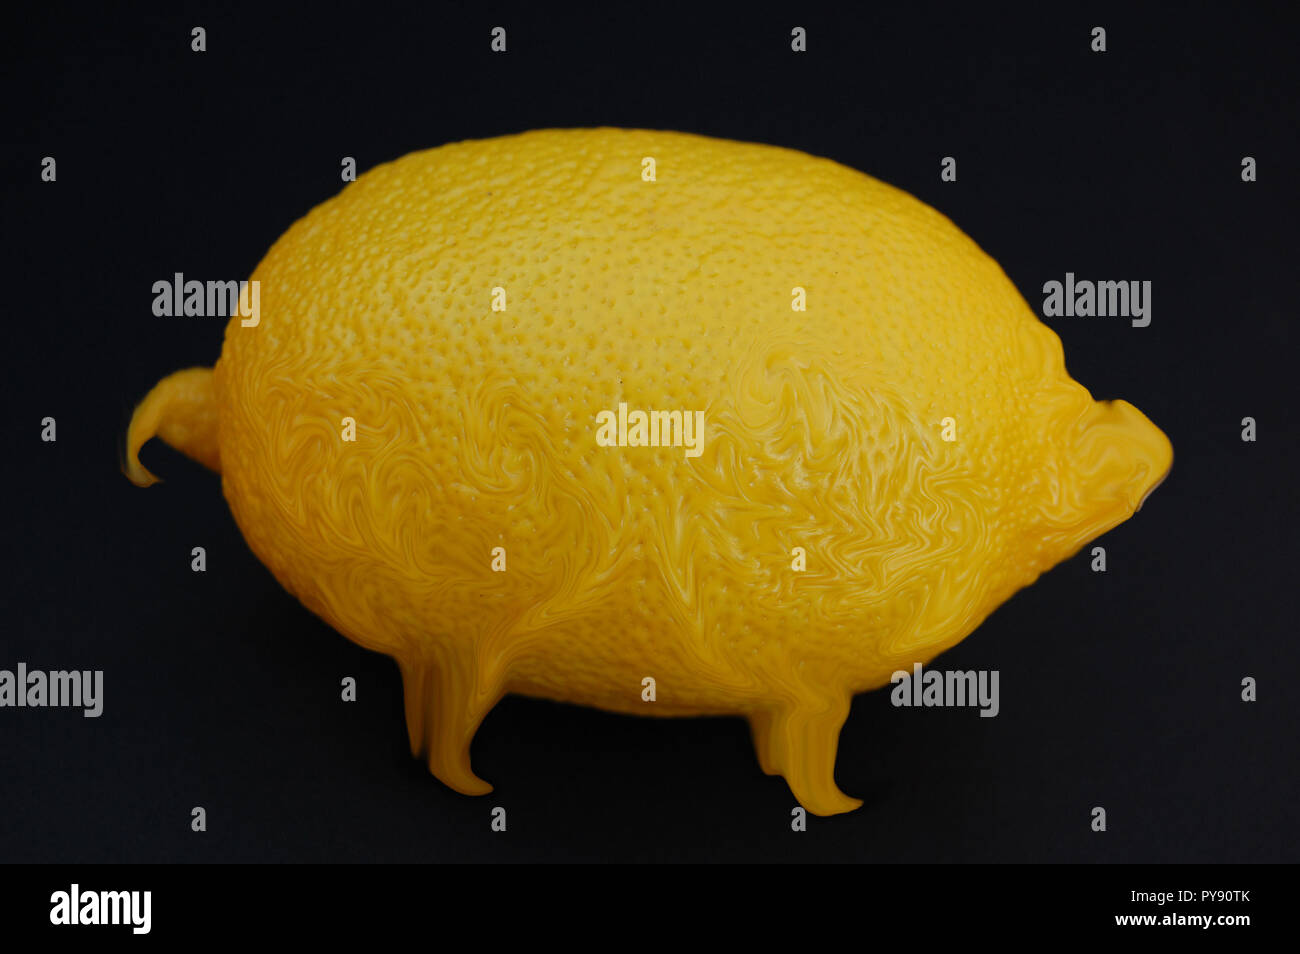 'Yellow Pig' or is it a Lemon? Stock Photo